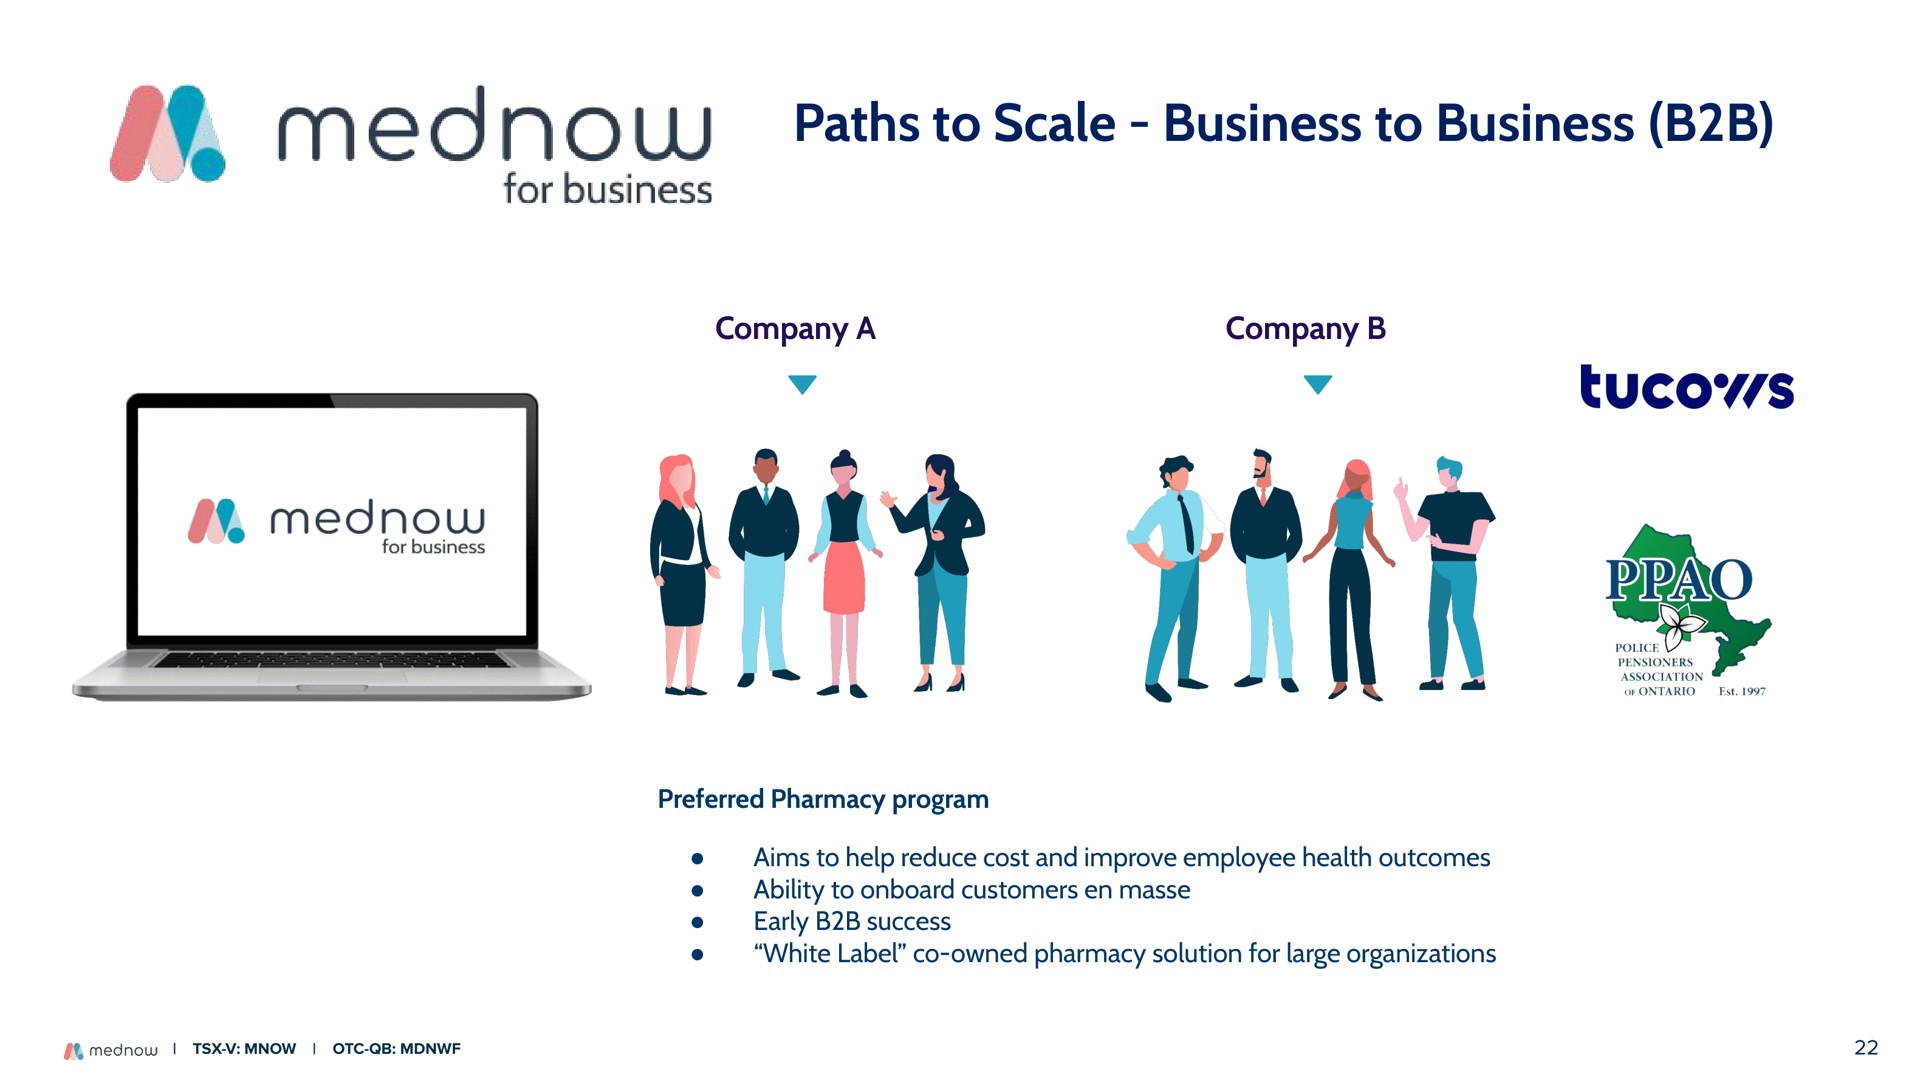 paths to scale business to business company a company preferred pharmacy program aims to help reduce cost and improve employee health outcomes ability to customers masse early success white label owned pharmacy solution for large organizations me mou | Mednow